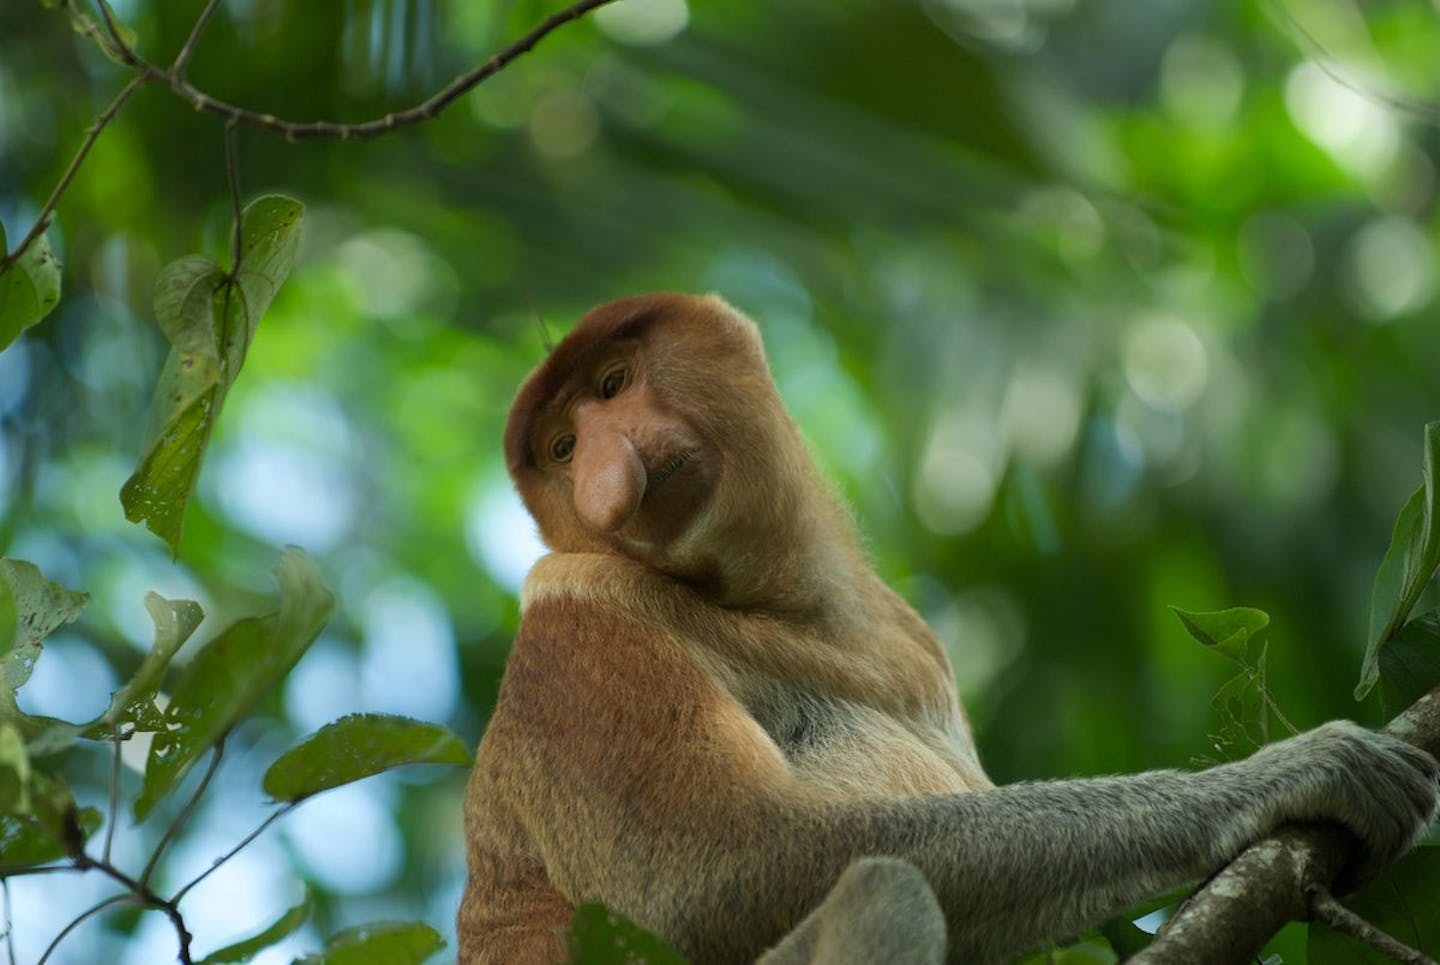 Why the Proboscis monkey has the largest nose of any primate